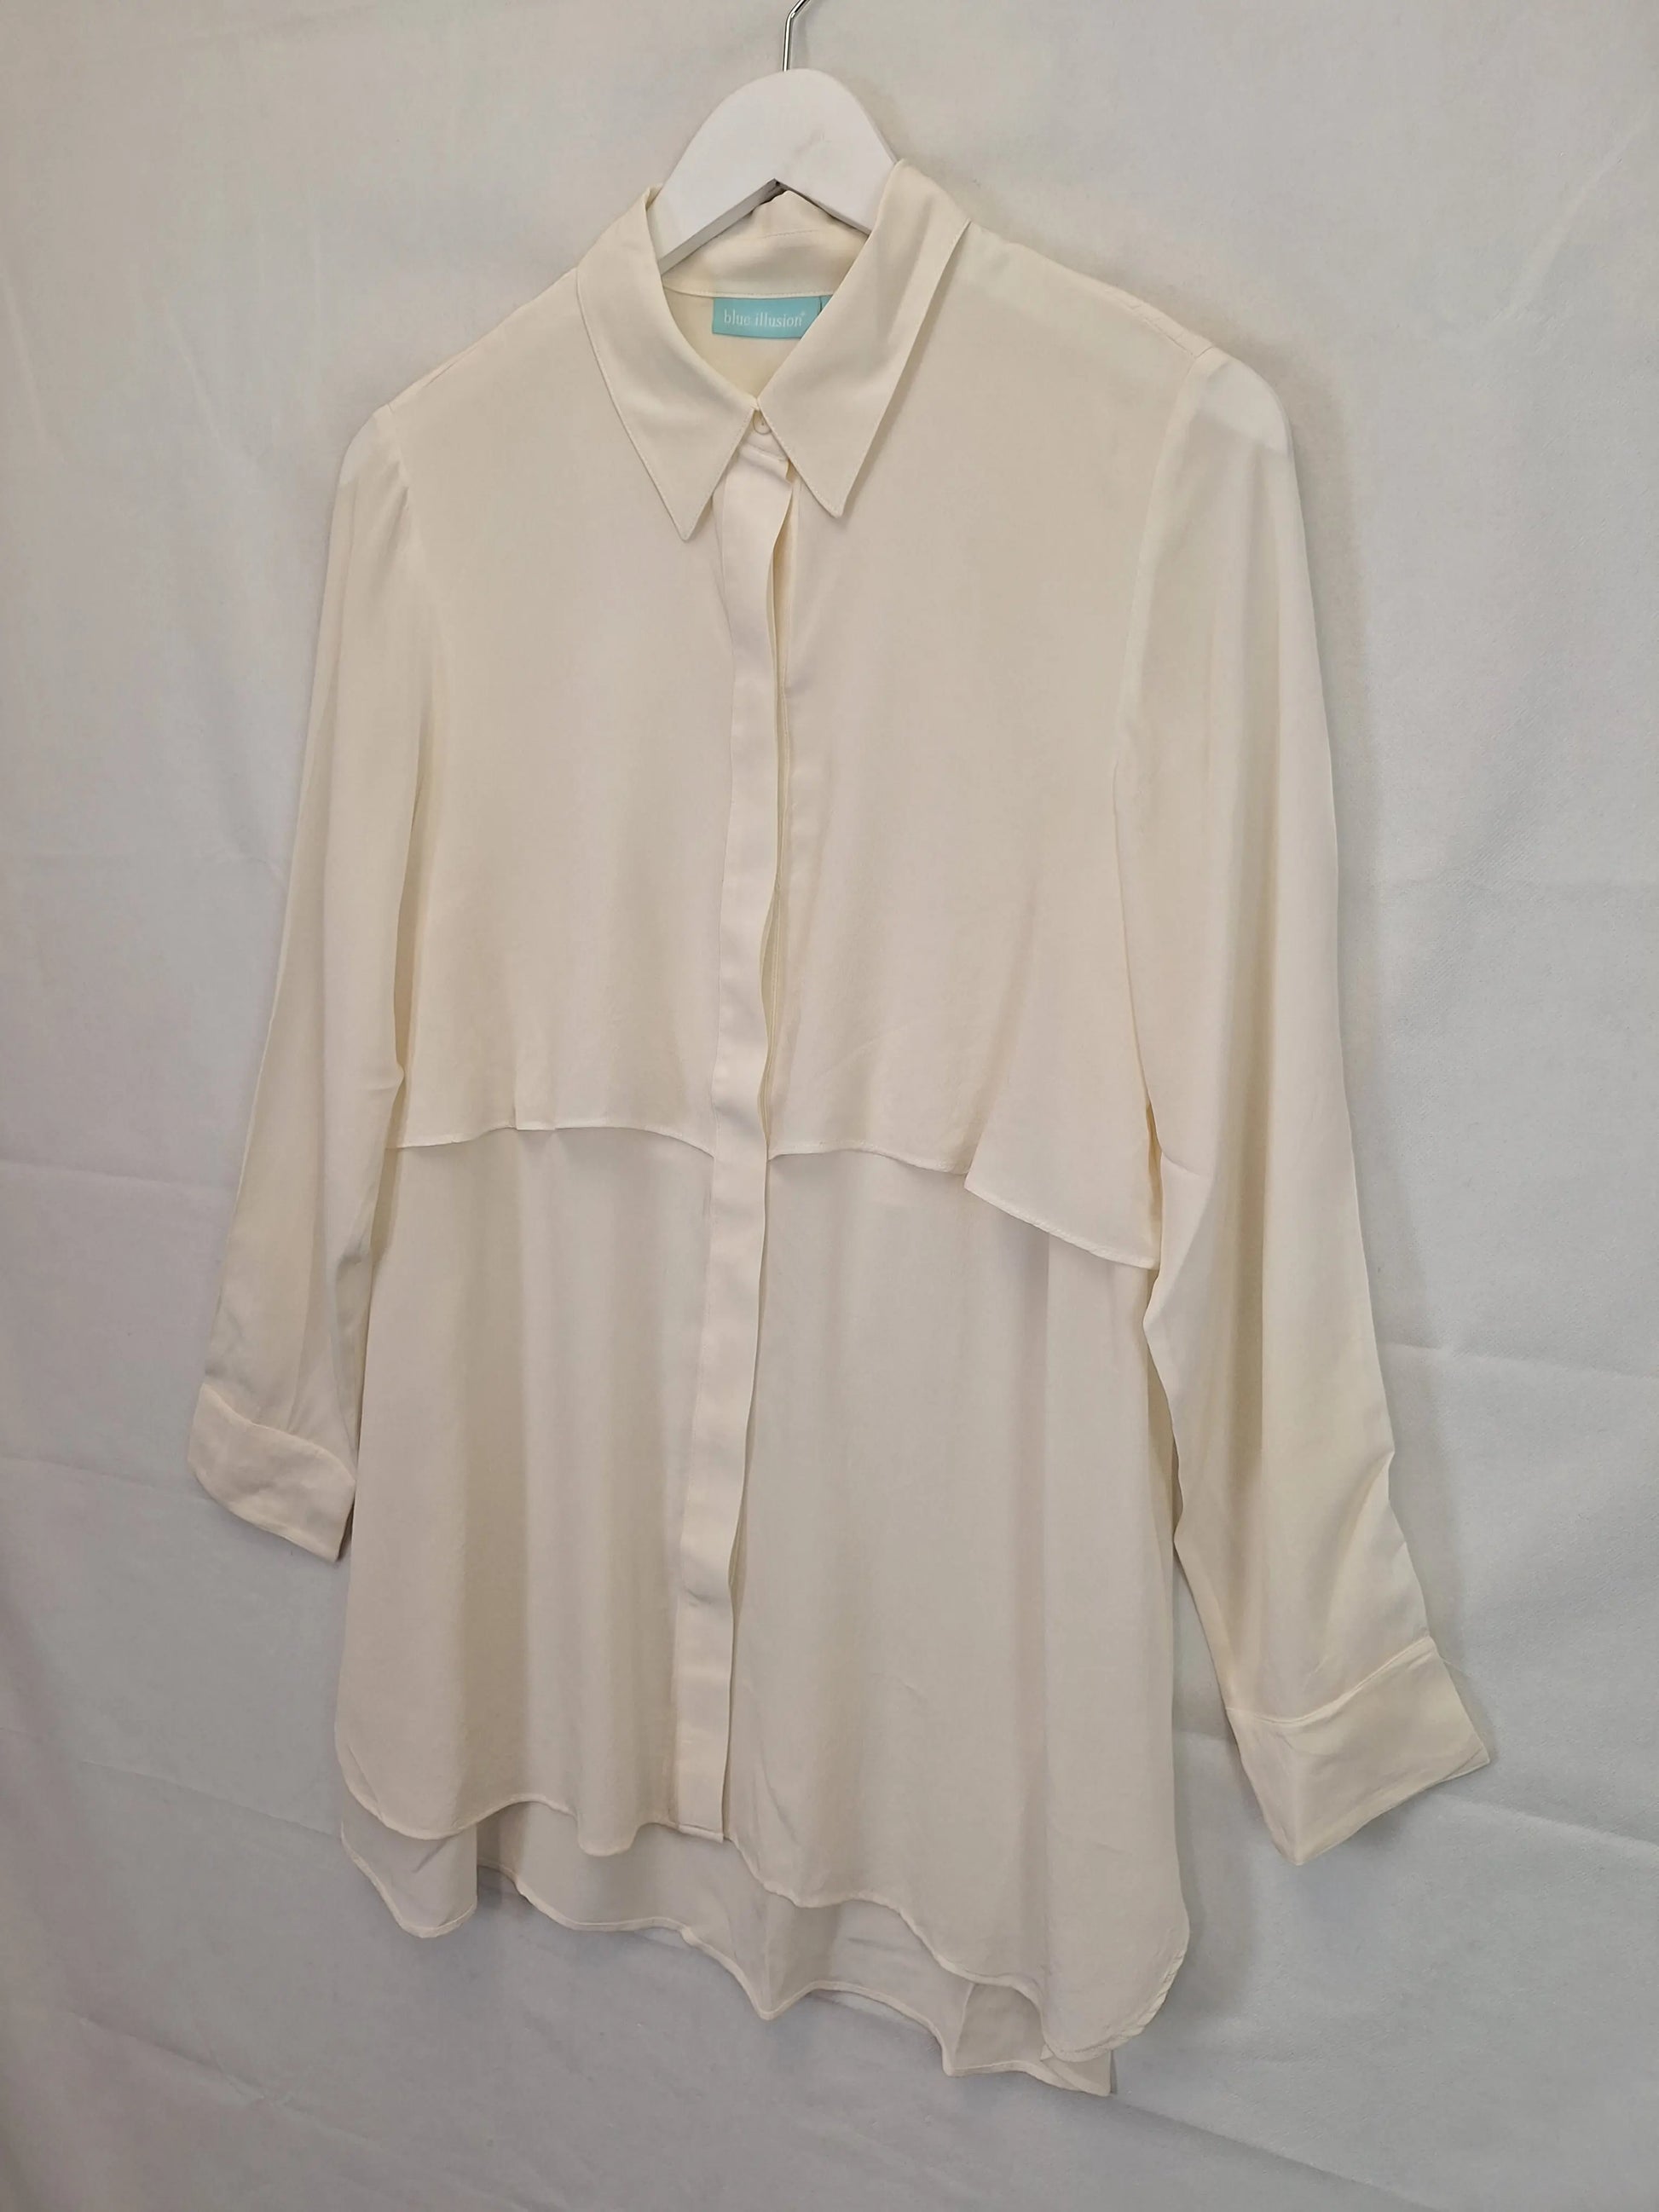 Blue Illusion Off White Long Shirt Size S by SwapUp-Online Second Hand Store-Online Thrift Store